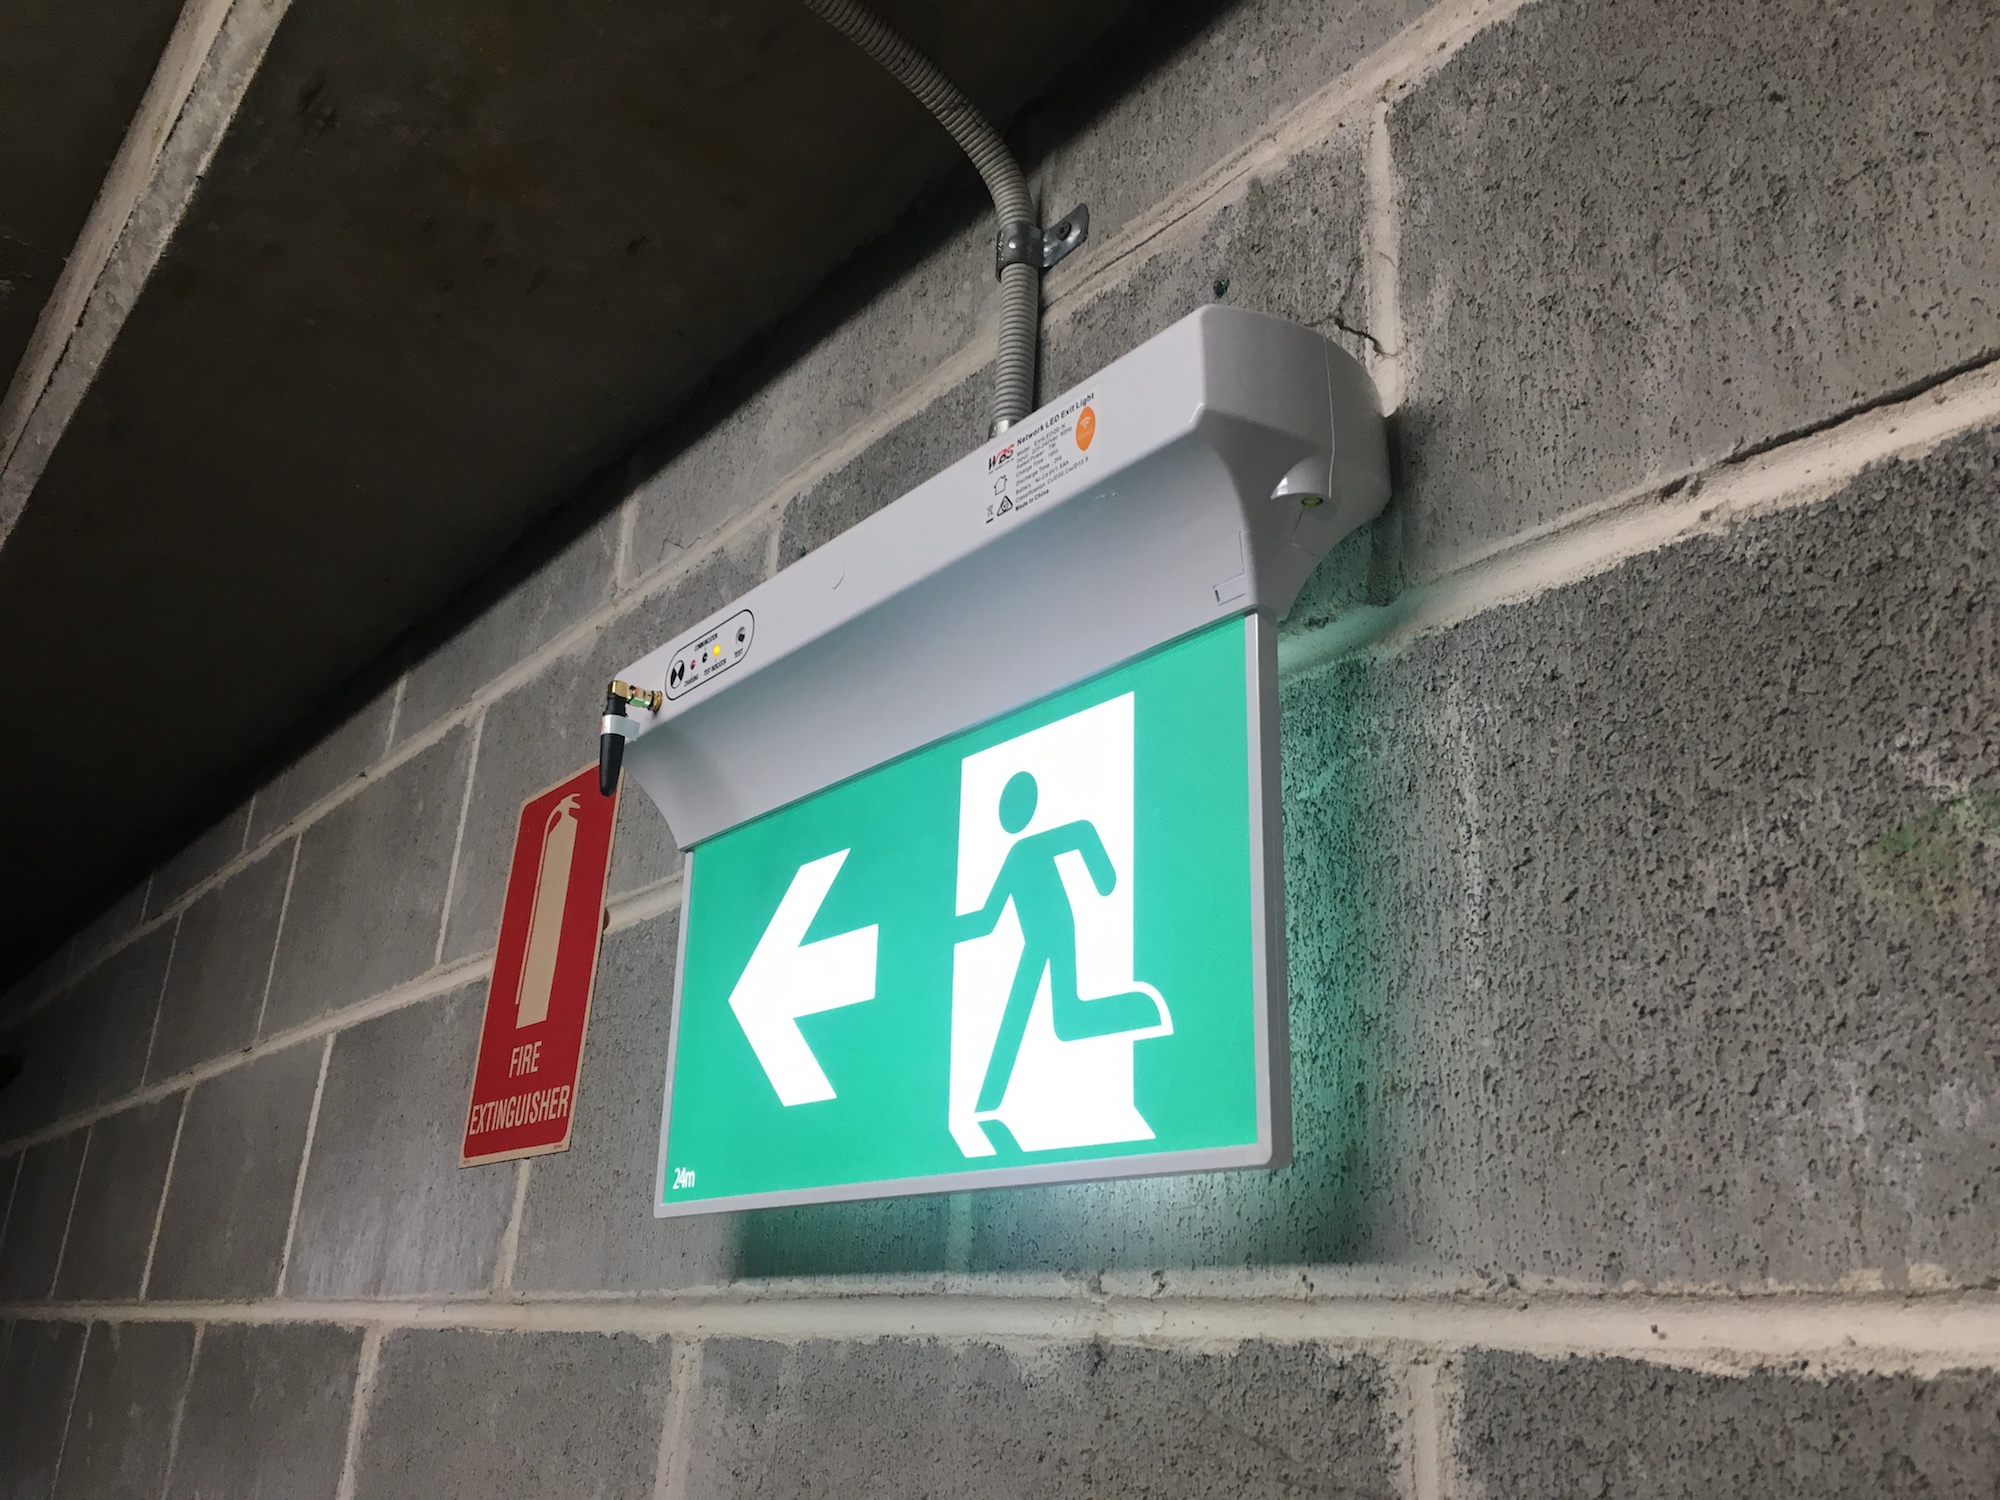 Revamp your ageing care facility with monitored emergency lighting